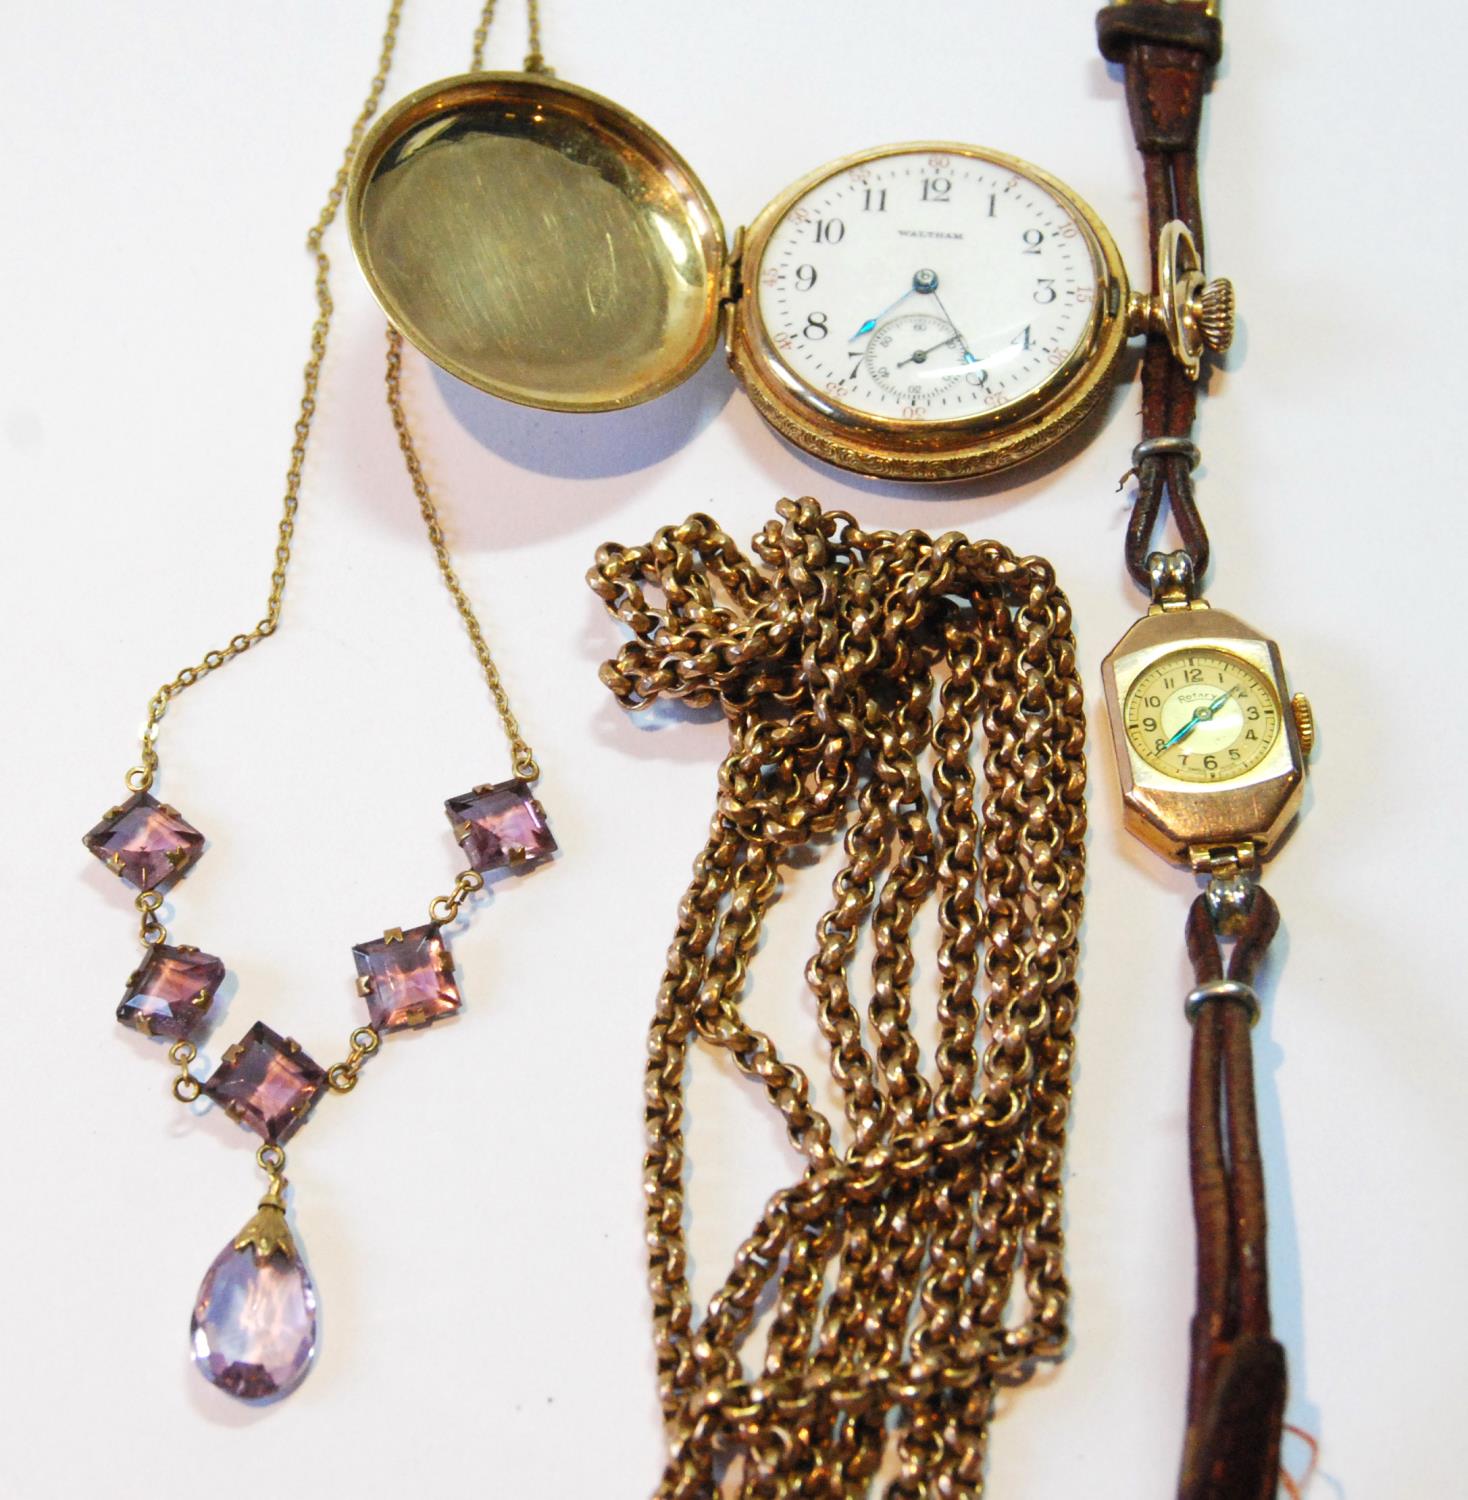 Waltham lady's watch in gold hunter case, '14k', a lady's 9ct Rotary watch, and two other rolled